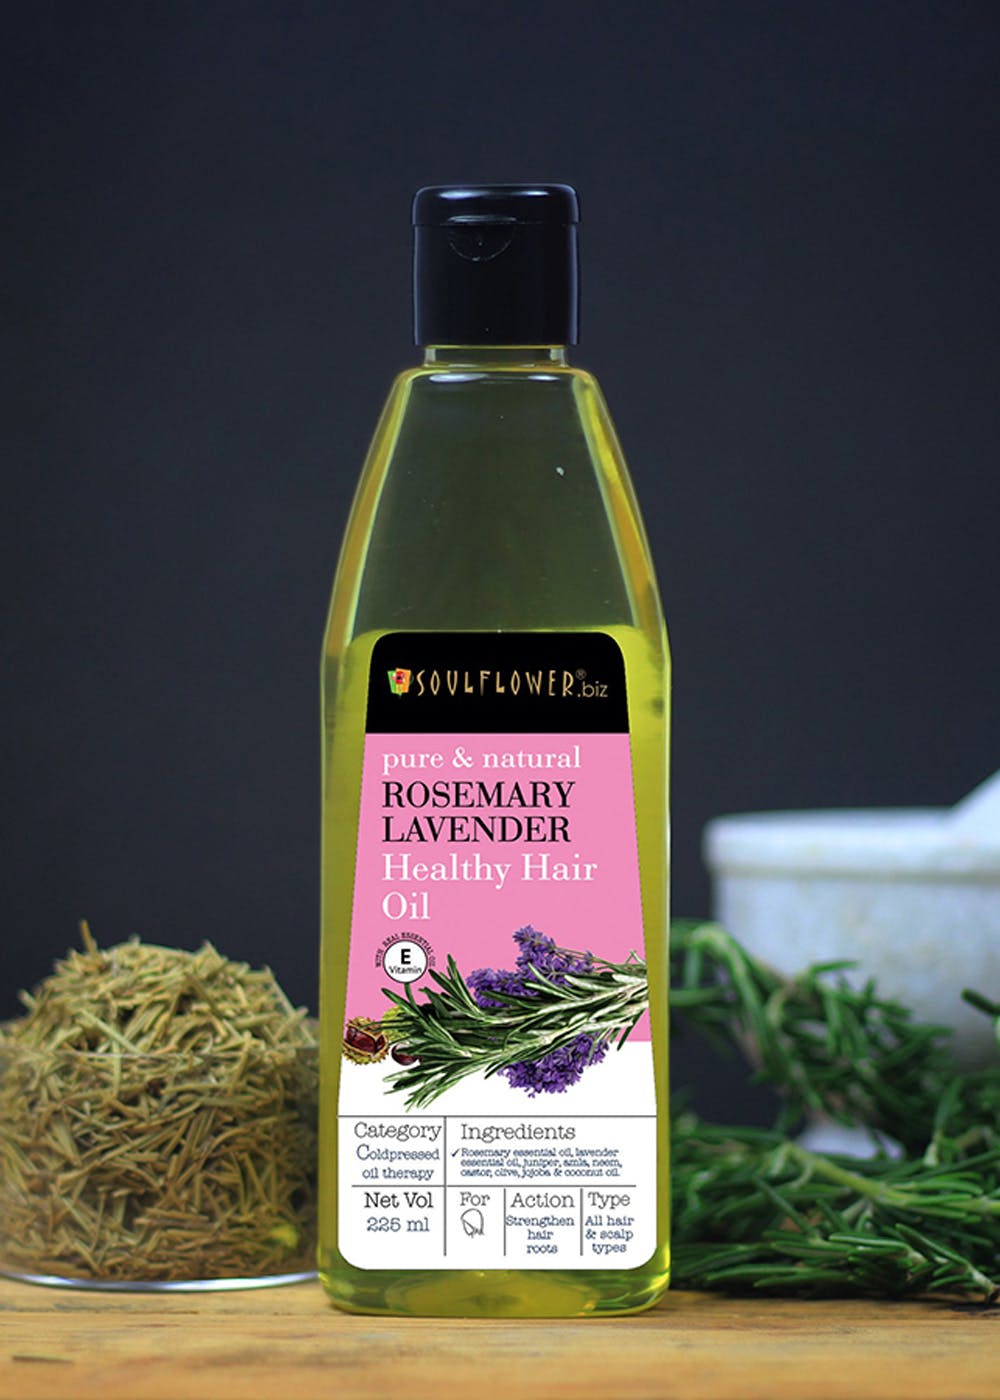 LAVENDER ESSENTIAL OIL BENEFITS The Aromatherapy Oil Your Hair and Body  Needs  Simply Organics